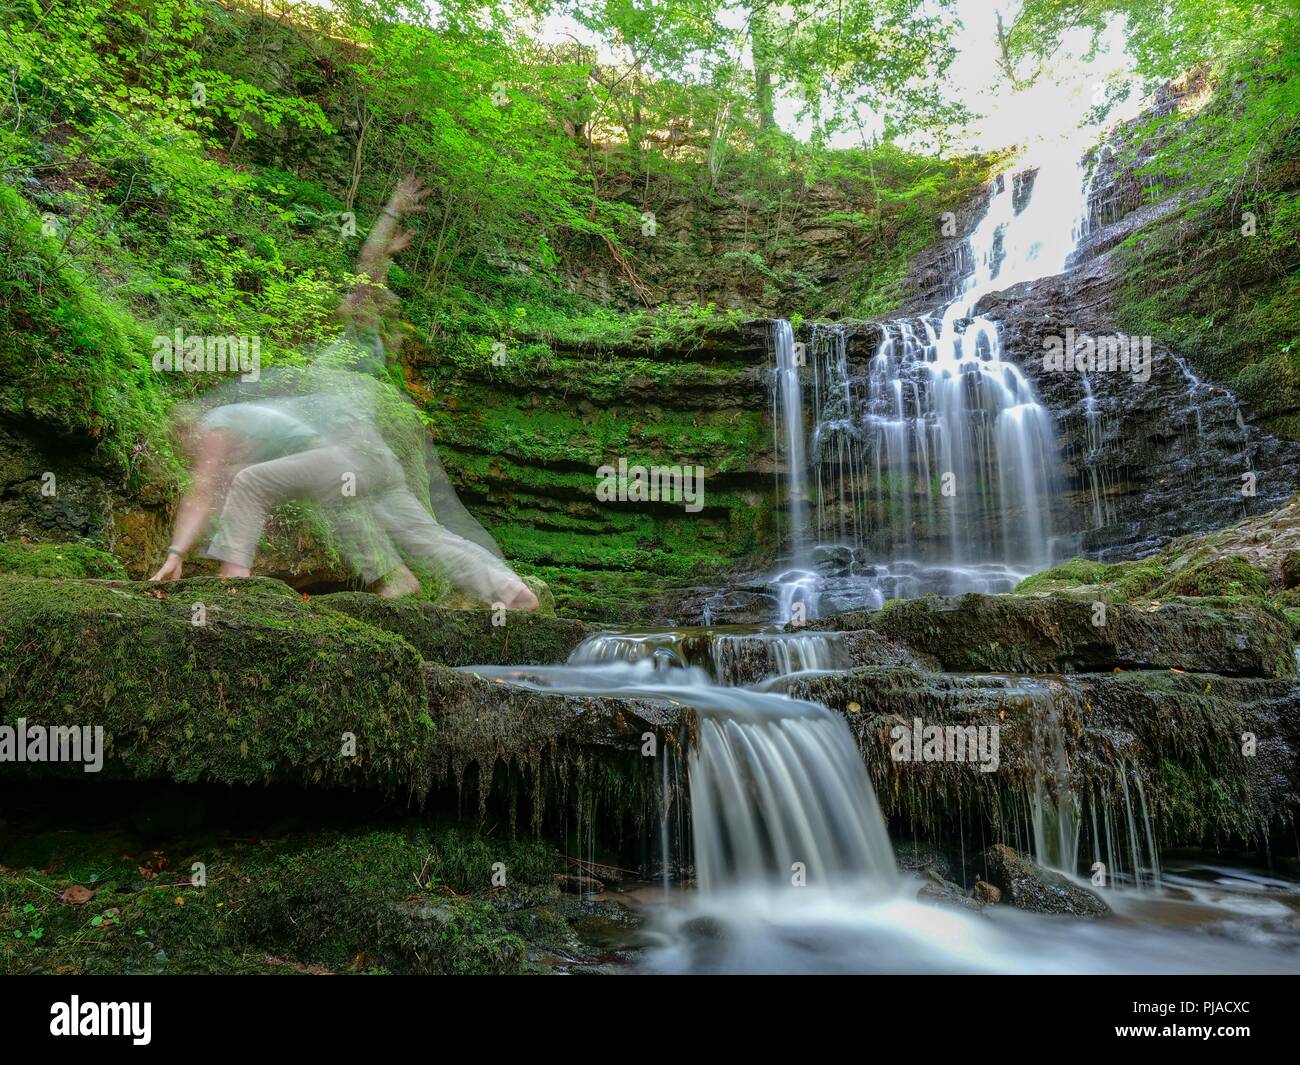 Settle, UK. 5th September 2018. UK Weather woman practicing yoga on a unusually hot sunny September day at Scaleber Force Waterfall, High Hill lane, Settle, Yorkshire Credit: Doug Blane/Alamy Live News Stock Photo